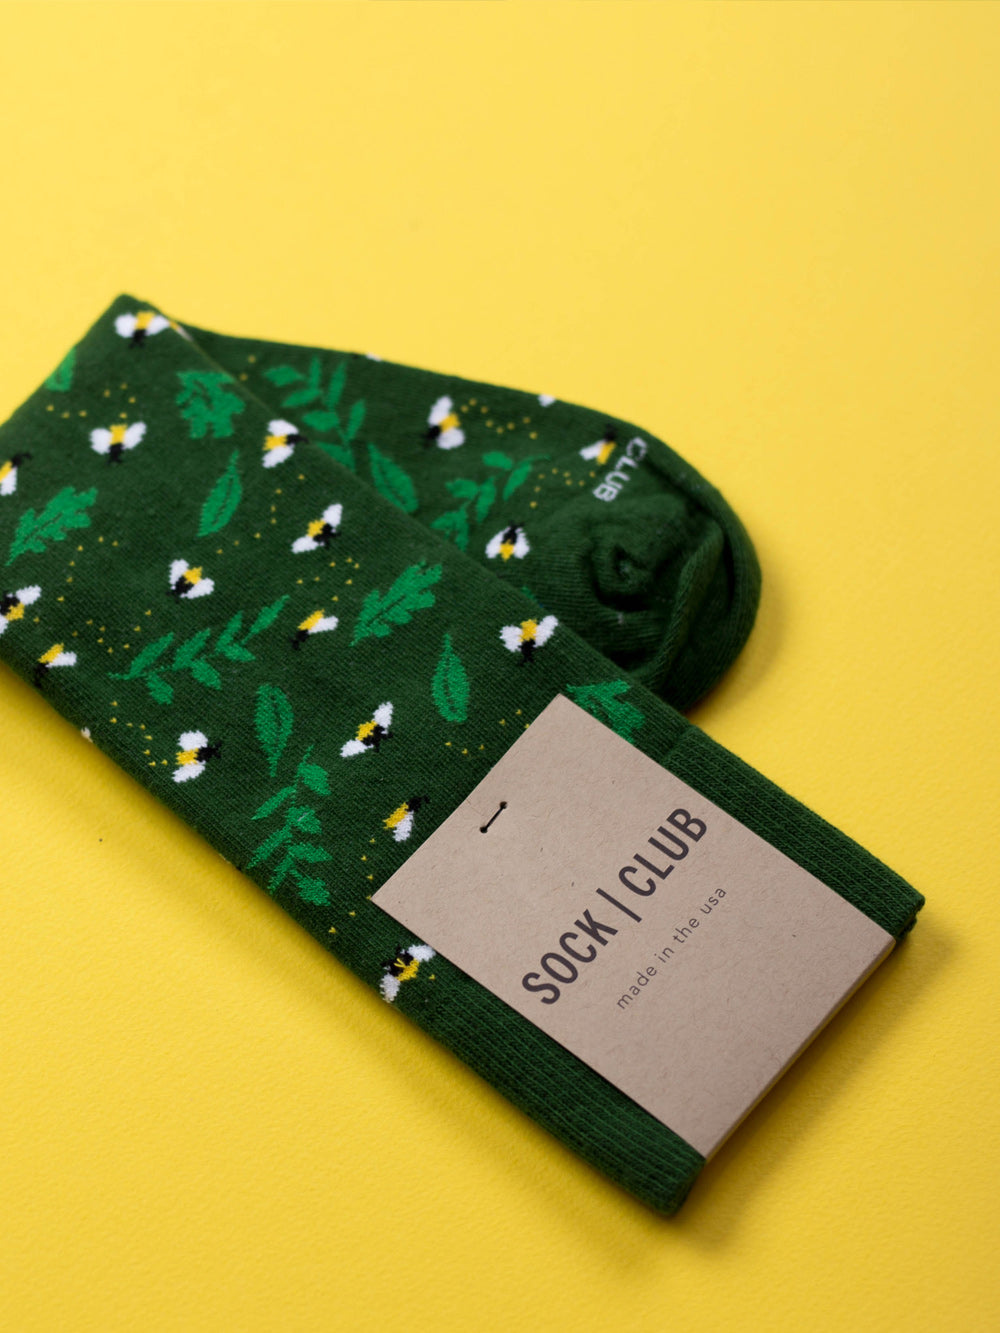 The Firefly - Pine - Sock Club Store